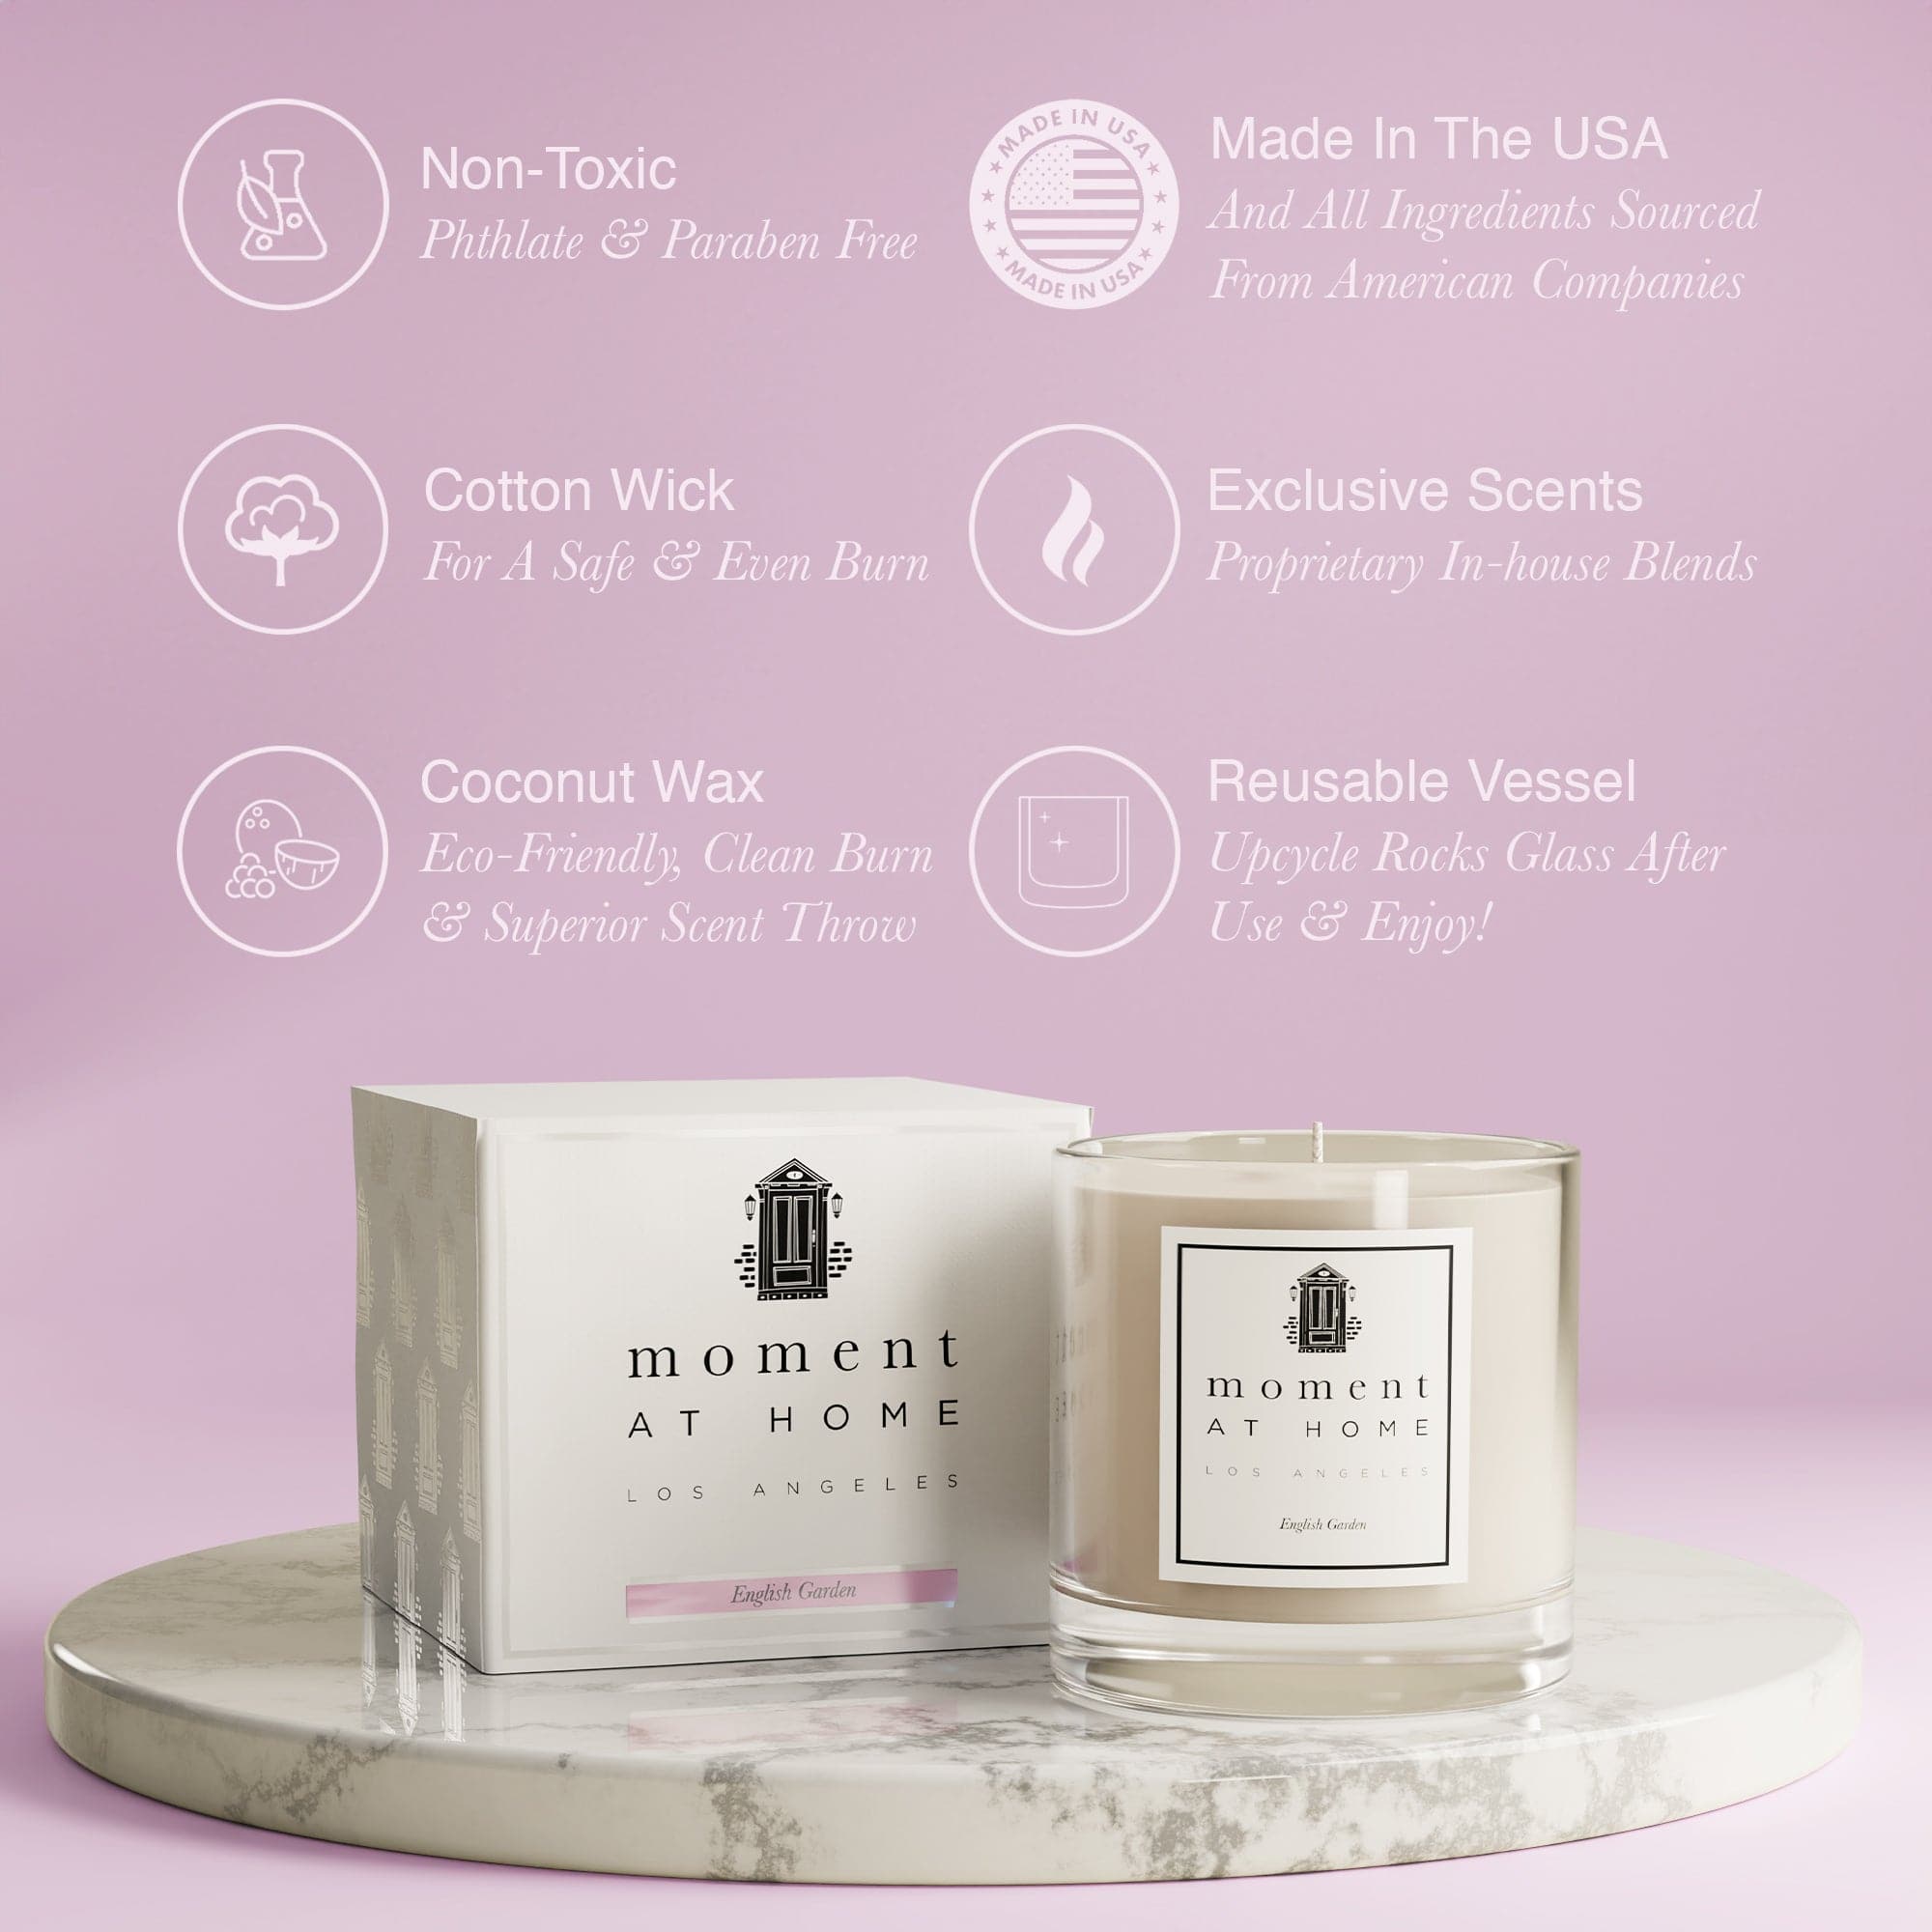 Moment At Home's English Garden Candles are Made In The USA with Coconut Wax, are non-toxic and safe to burn at home. 